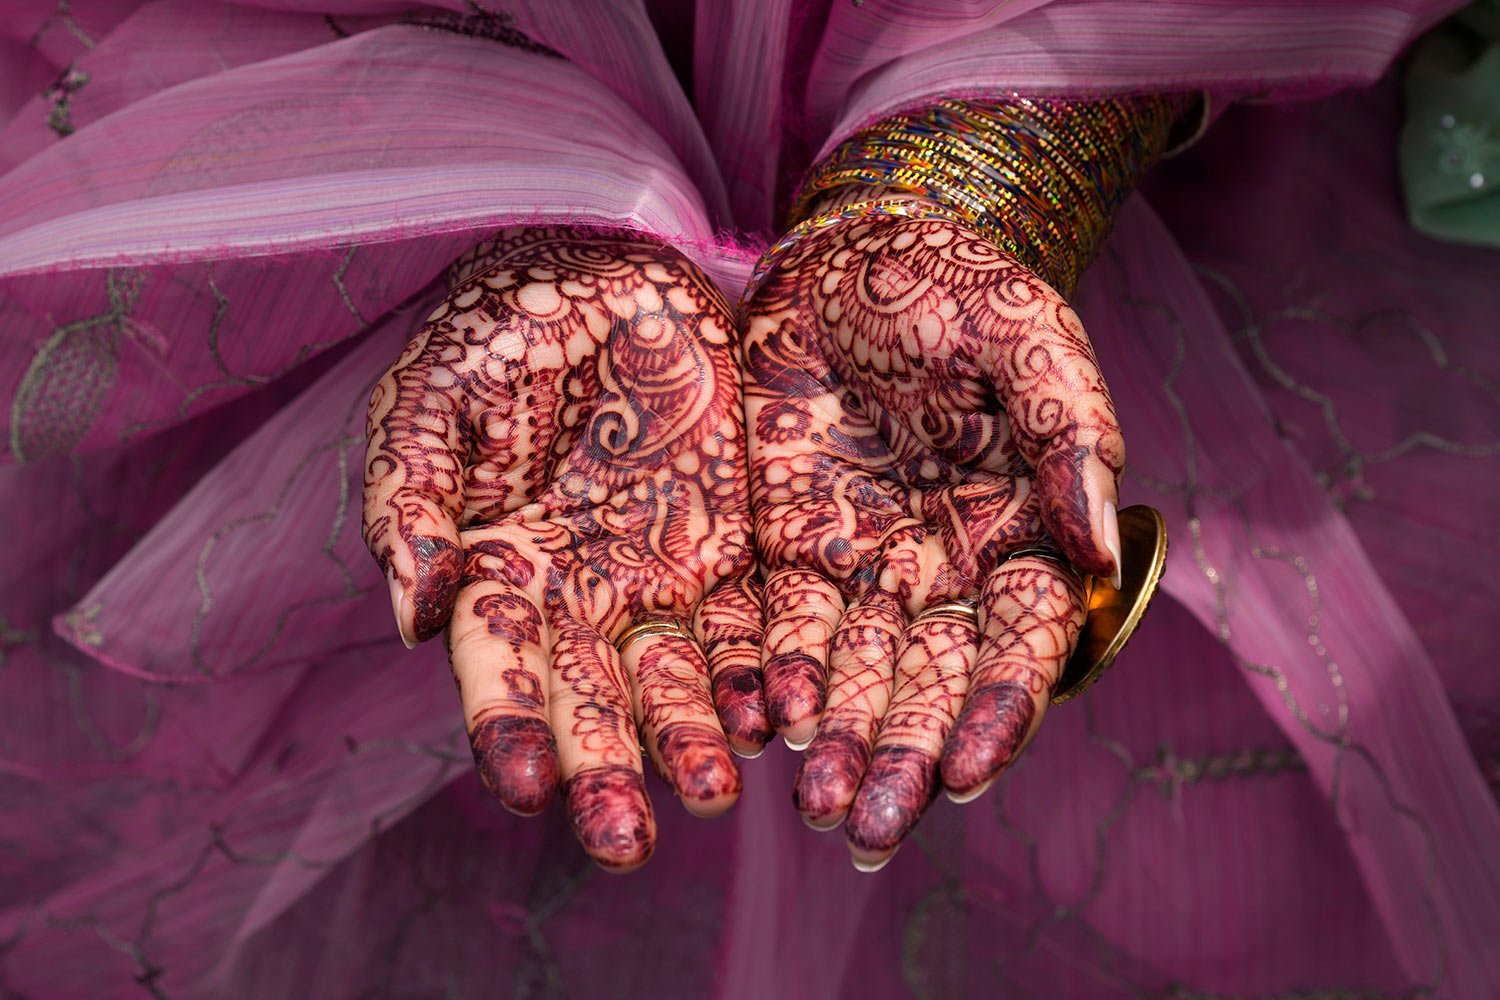  A Muslim woman paints her hands with traditional "henna" as she performs an Eid al-Fitr prayer, marking the end of the fasting month of Ramadan, at historical Badshahi mosque, in Lahore, Pakistan, Saturday, April, 22, 2023. (AP Photo/K.M. Chaudary) 